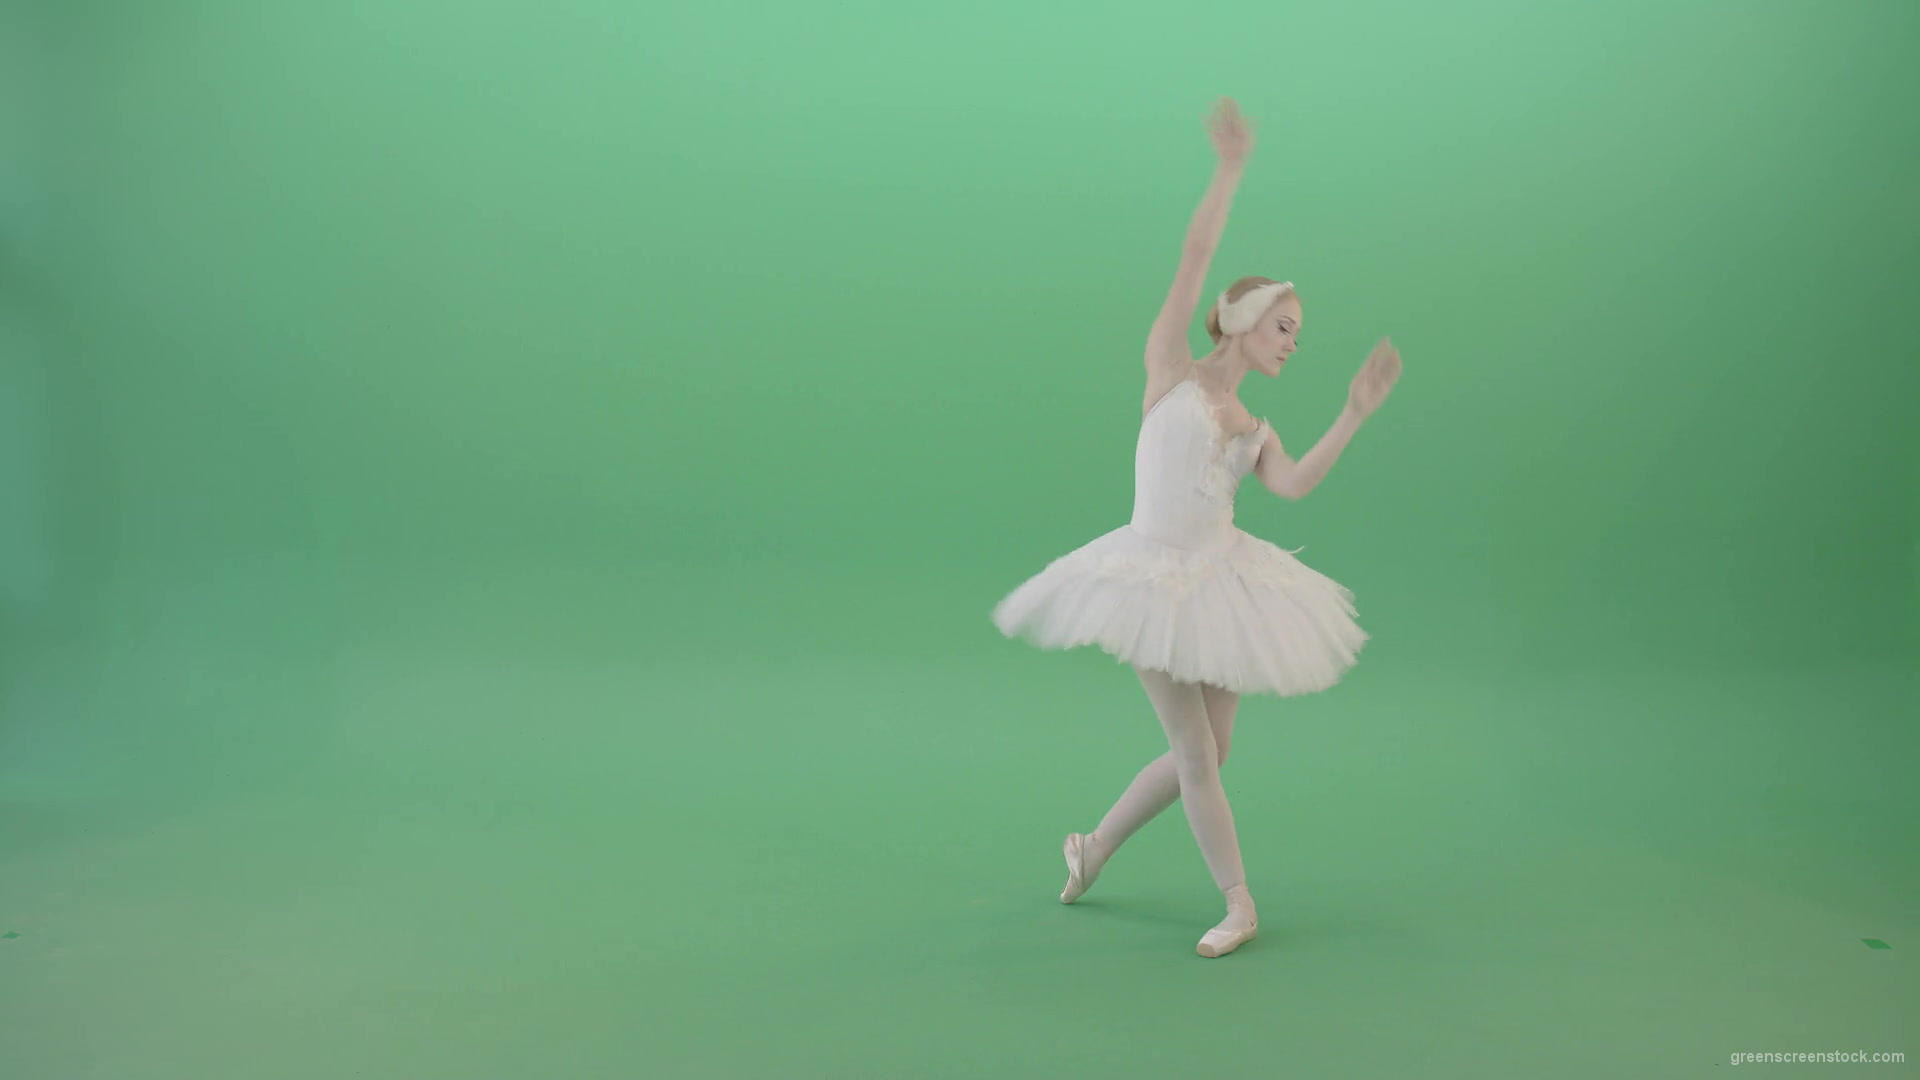 Fashion-snow-white-ballet-dancing-girl-showing-swan-lake-dance-isolated-on-Green-Screen-4K-Video-Footage-1920_008 Green Screen Stock